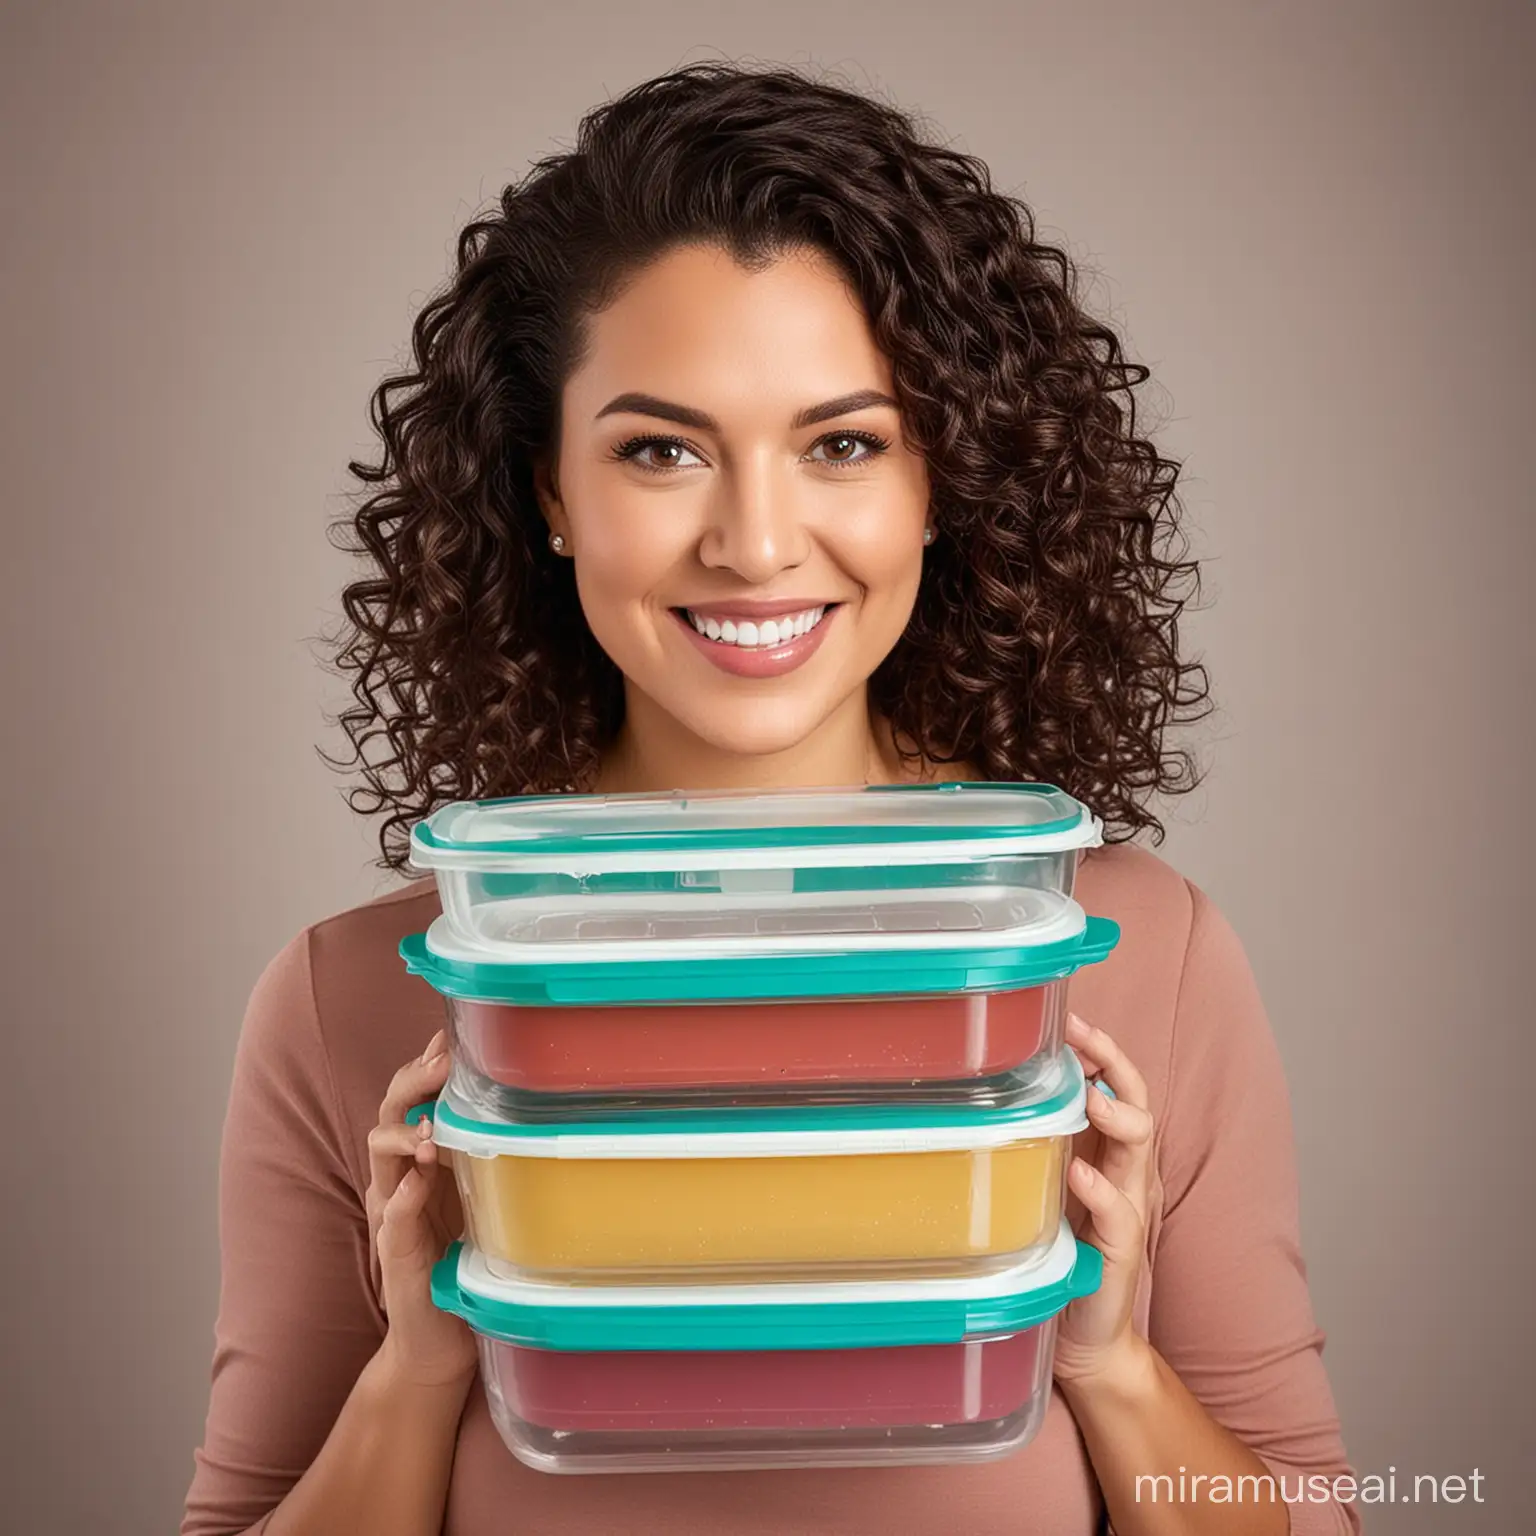 Woman Displaying Tupperware Products in a Chic Lifestyle Photo